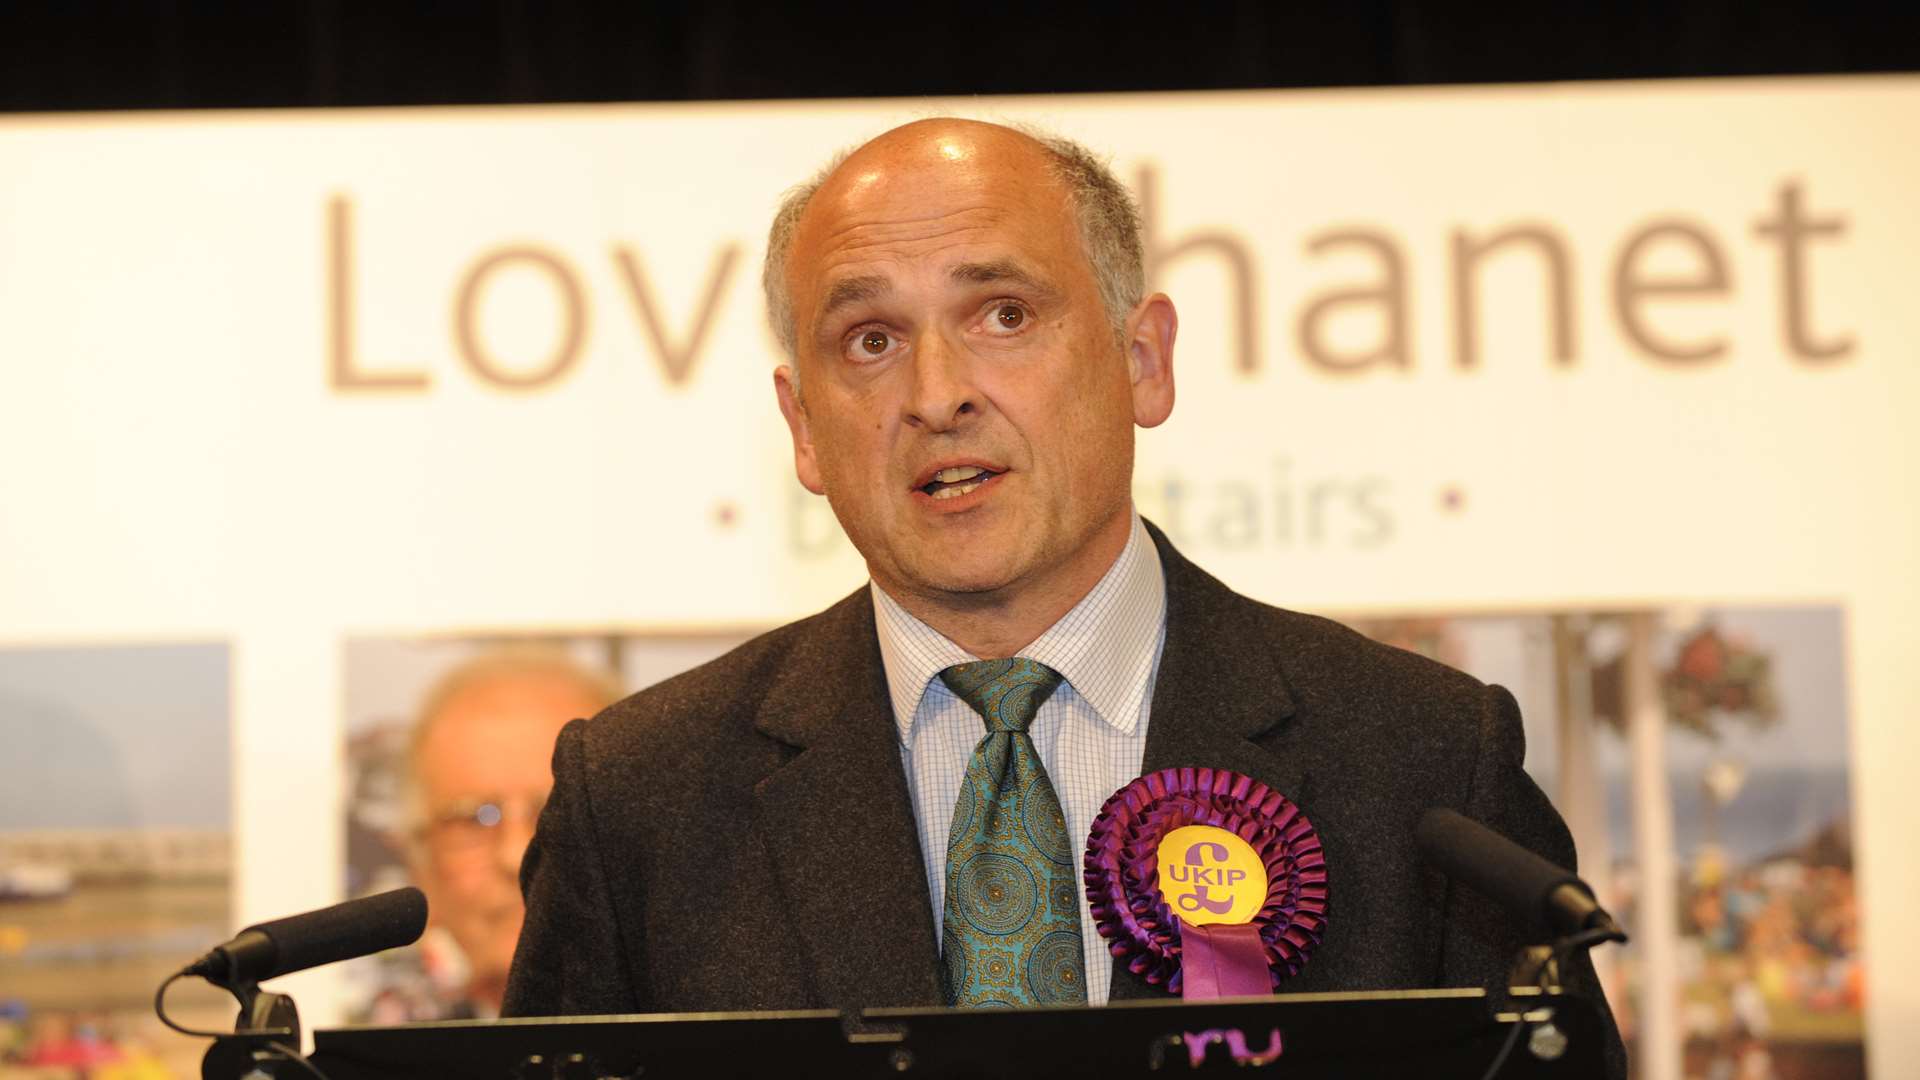 Ukip's Piers Wauchope finished second in the 2015 election